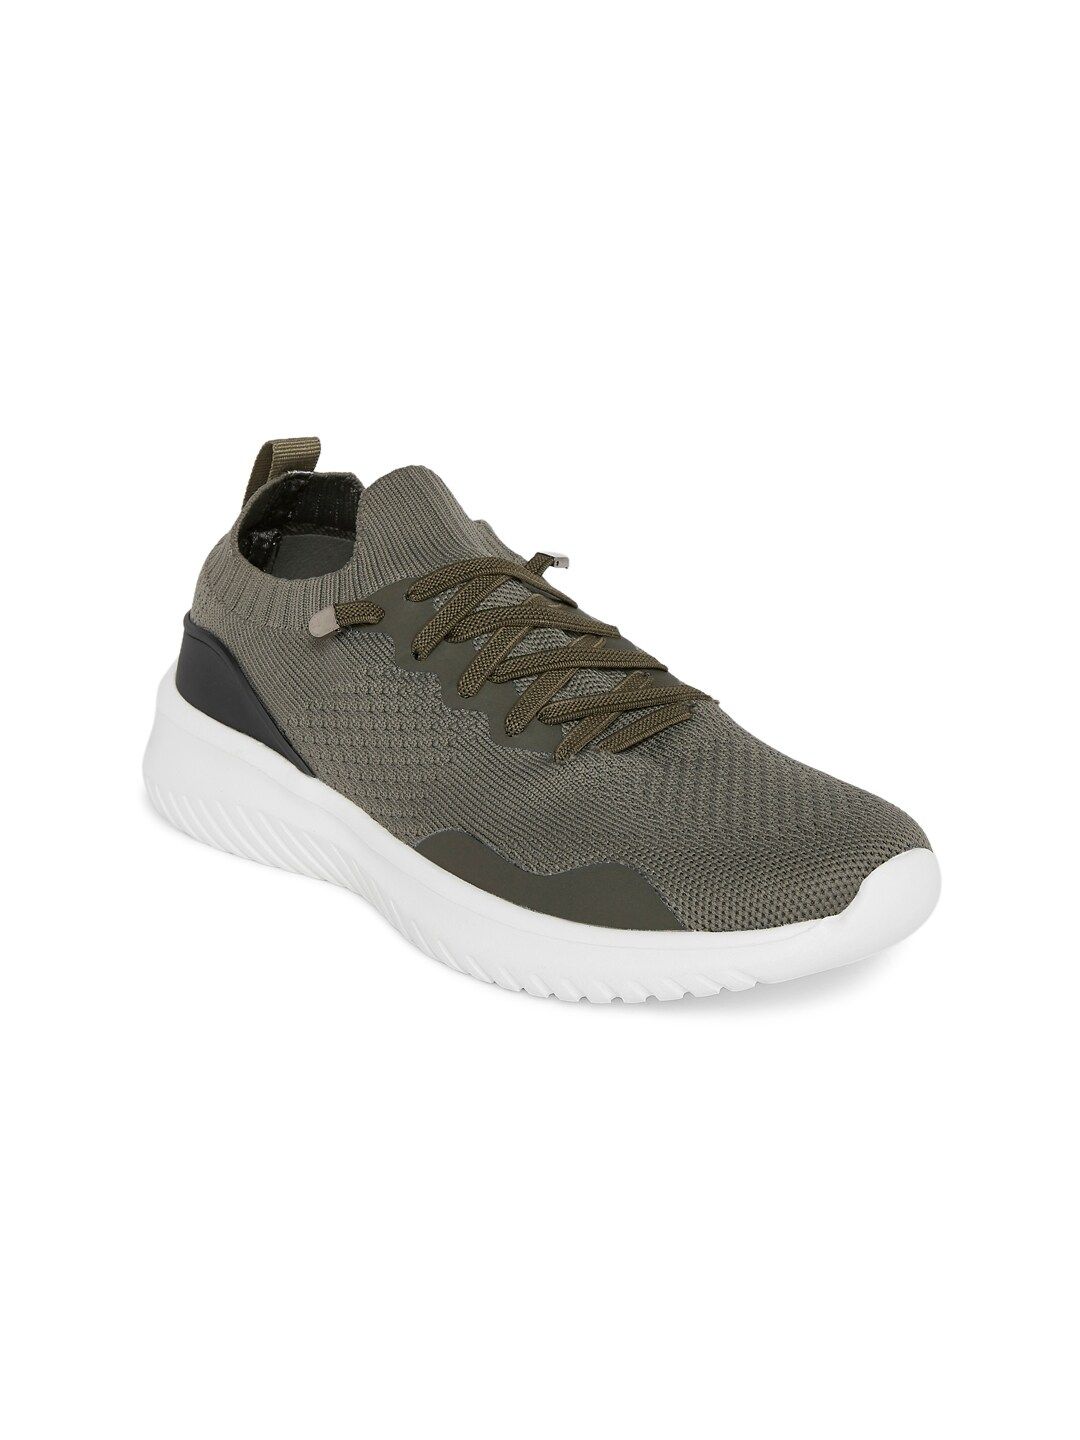 Forever Glam by Pantaloons Women Olive Green Flyknit Running Non-Marking Shoes Price in India